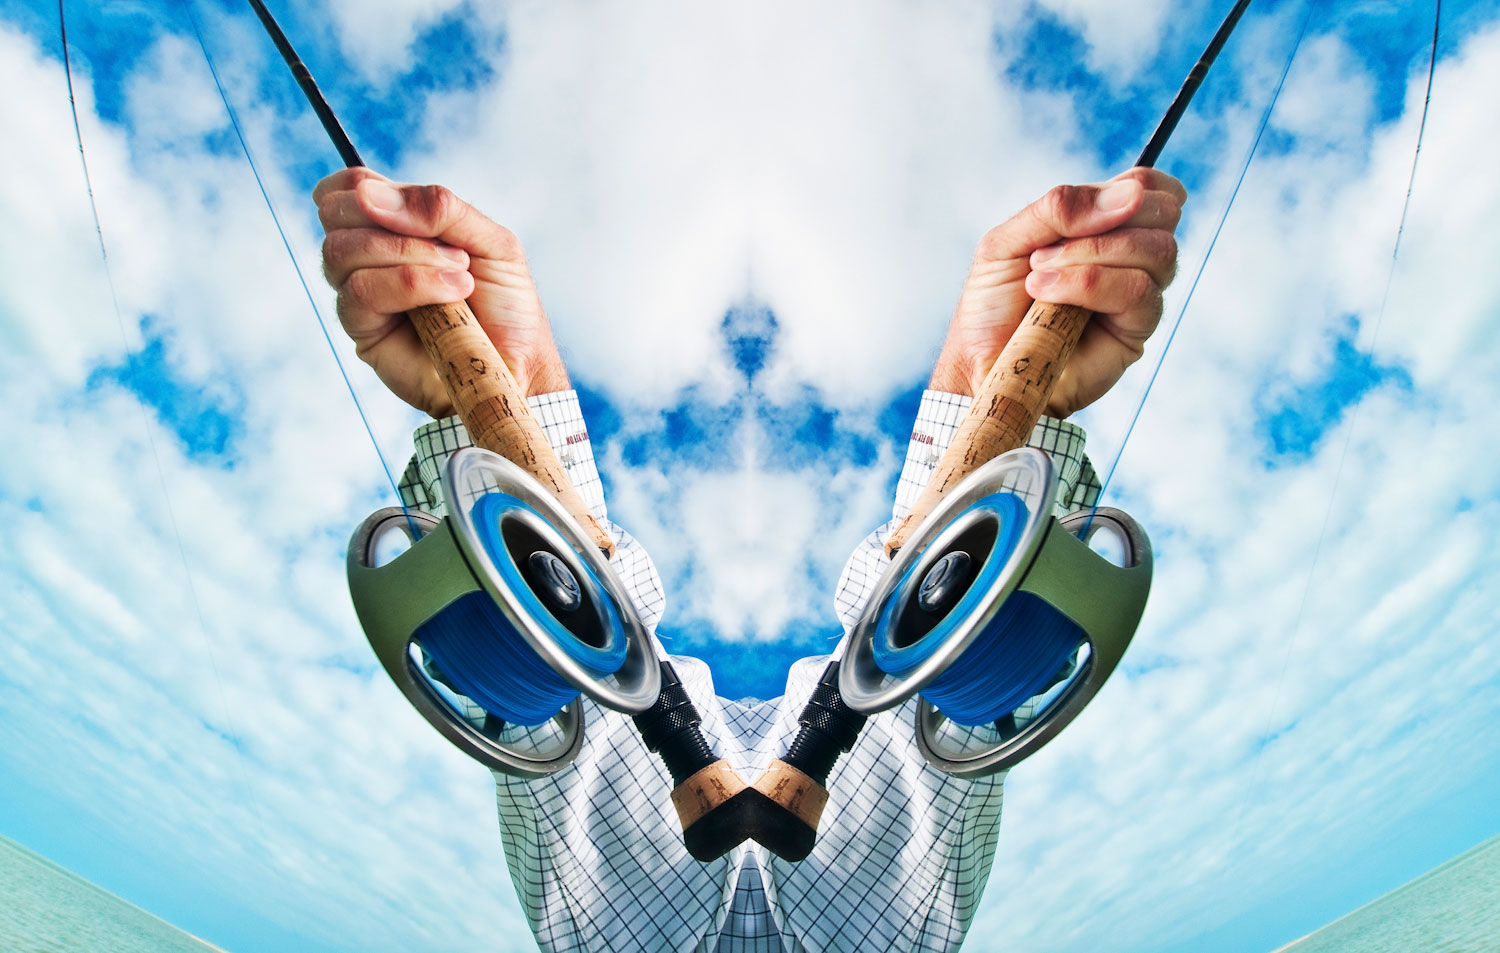 How to Setup a Fly Fishing Rod and Reel: From Reel to Fly - Guide  Recommended